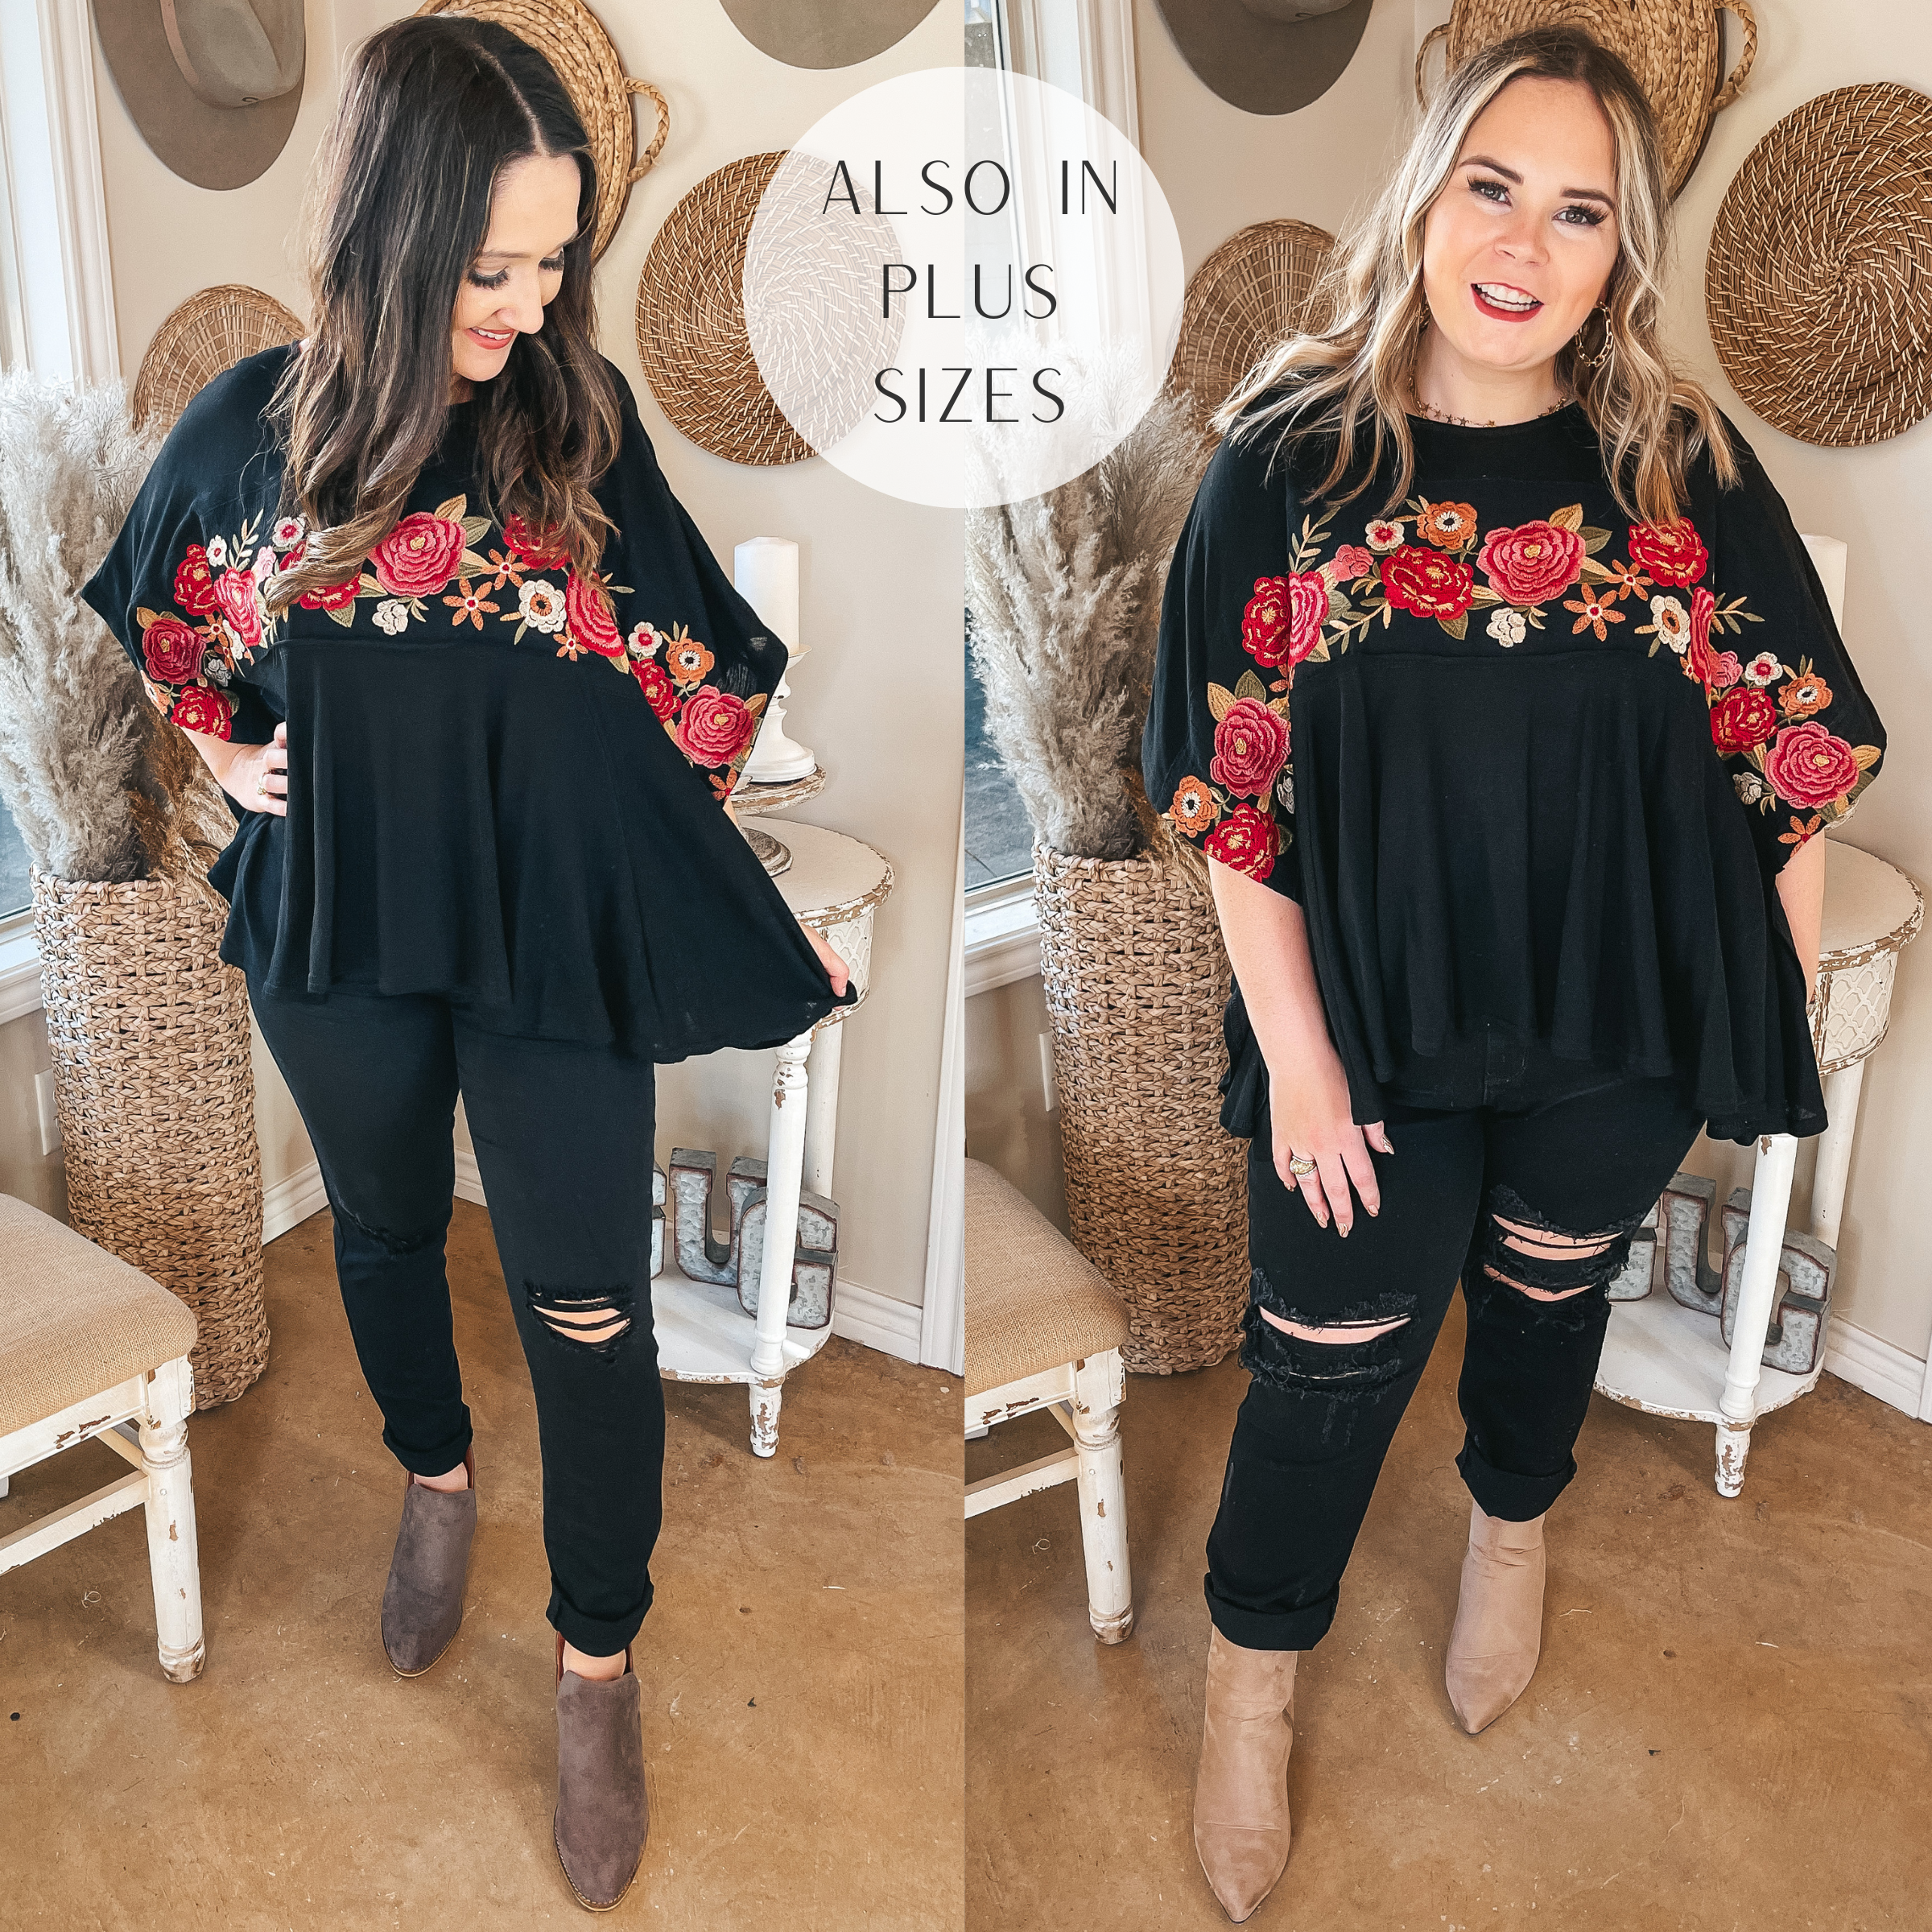 Models are wearing a black poncho top that has a rose floral embroidered print across the bust. Both models have it paired with black skinny jeans and taupe booties.